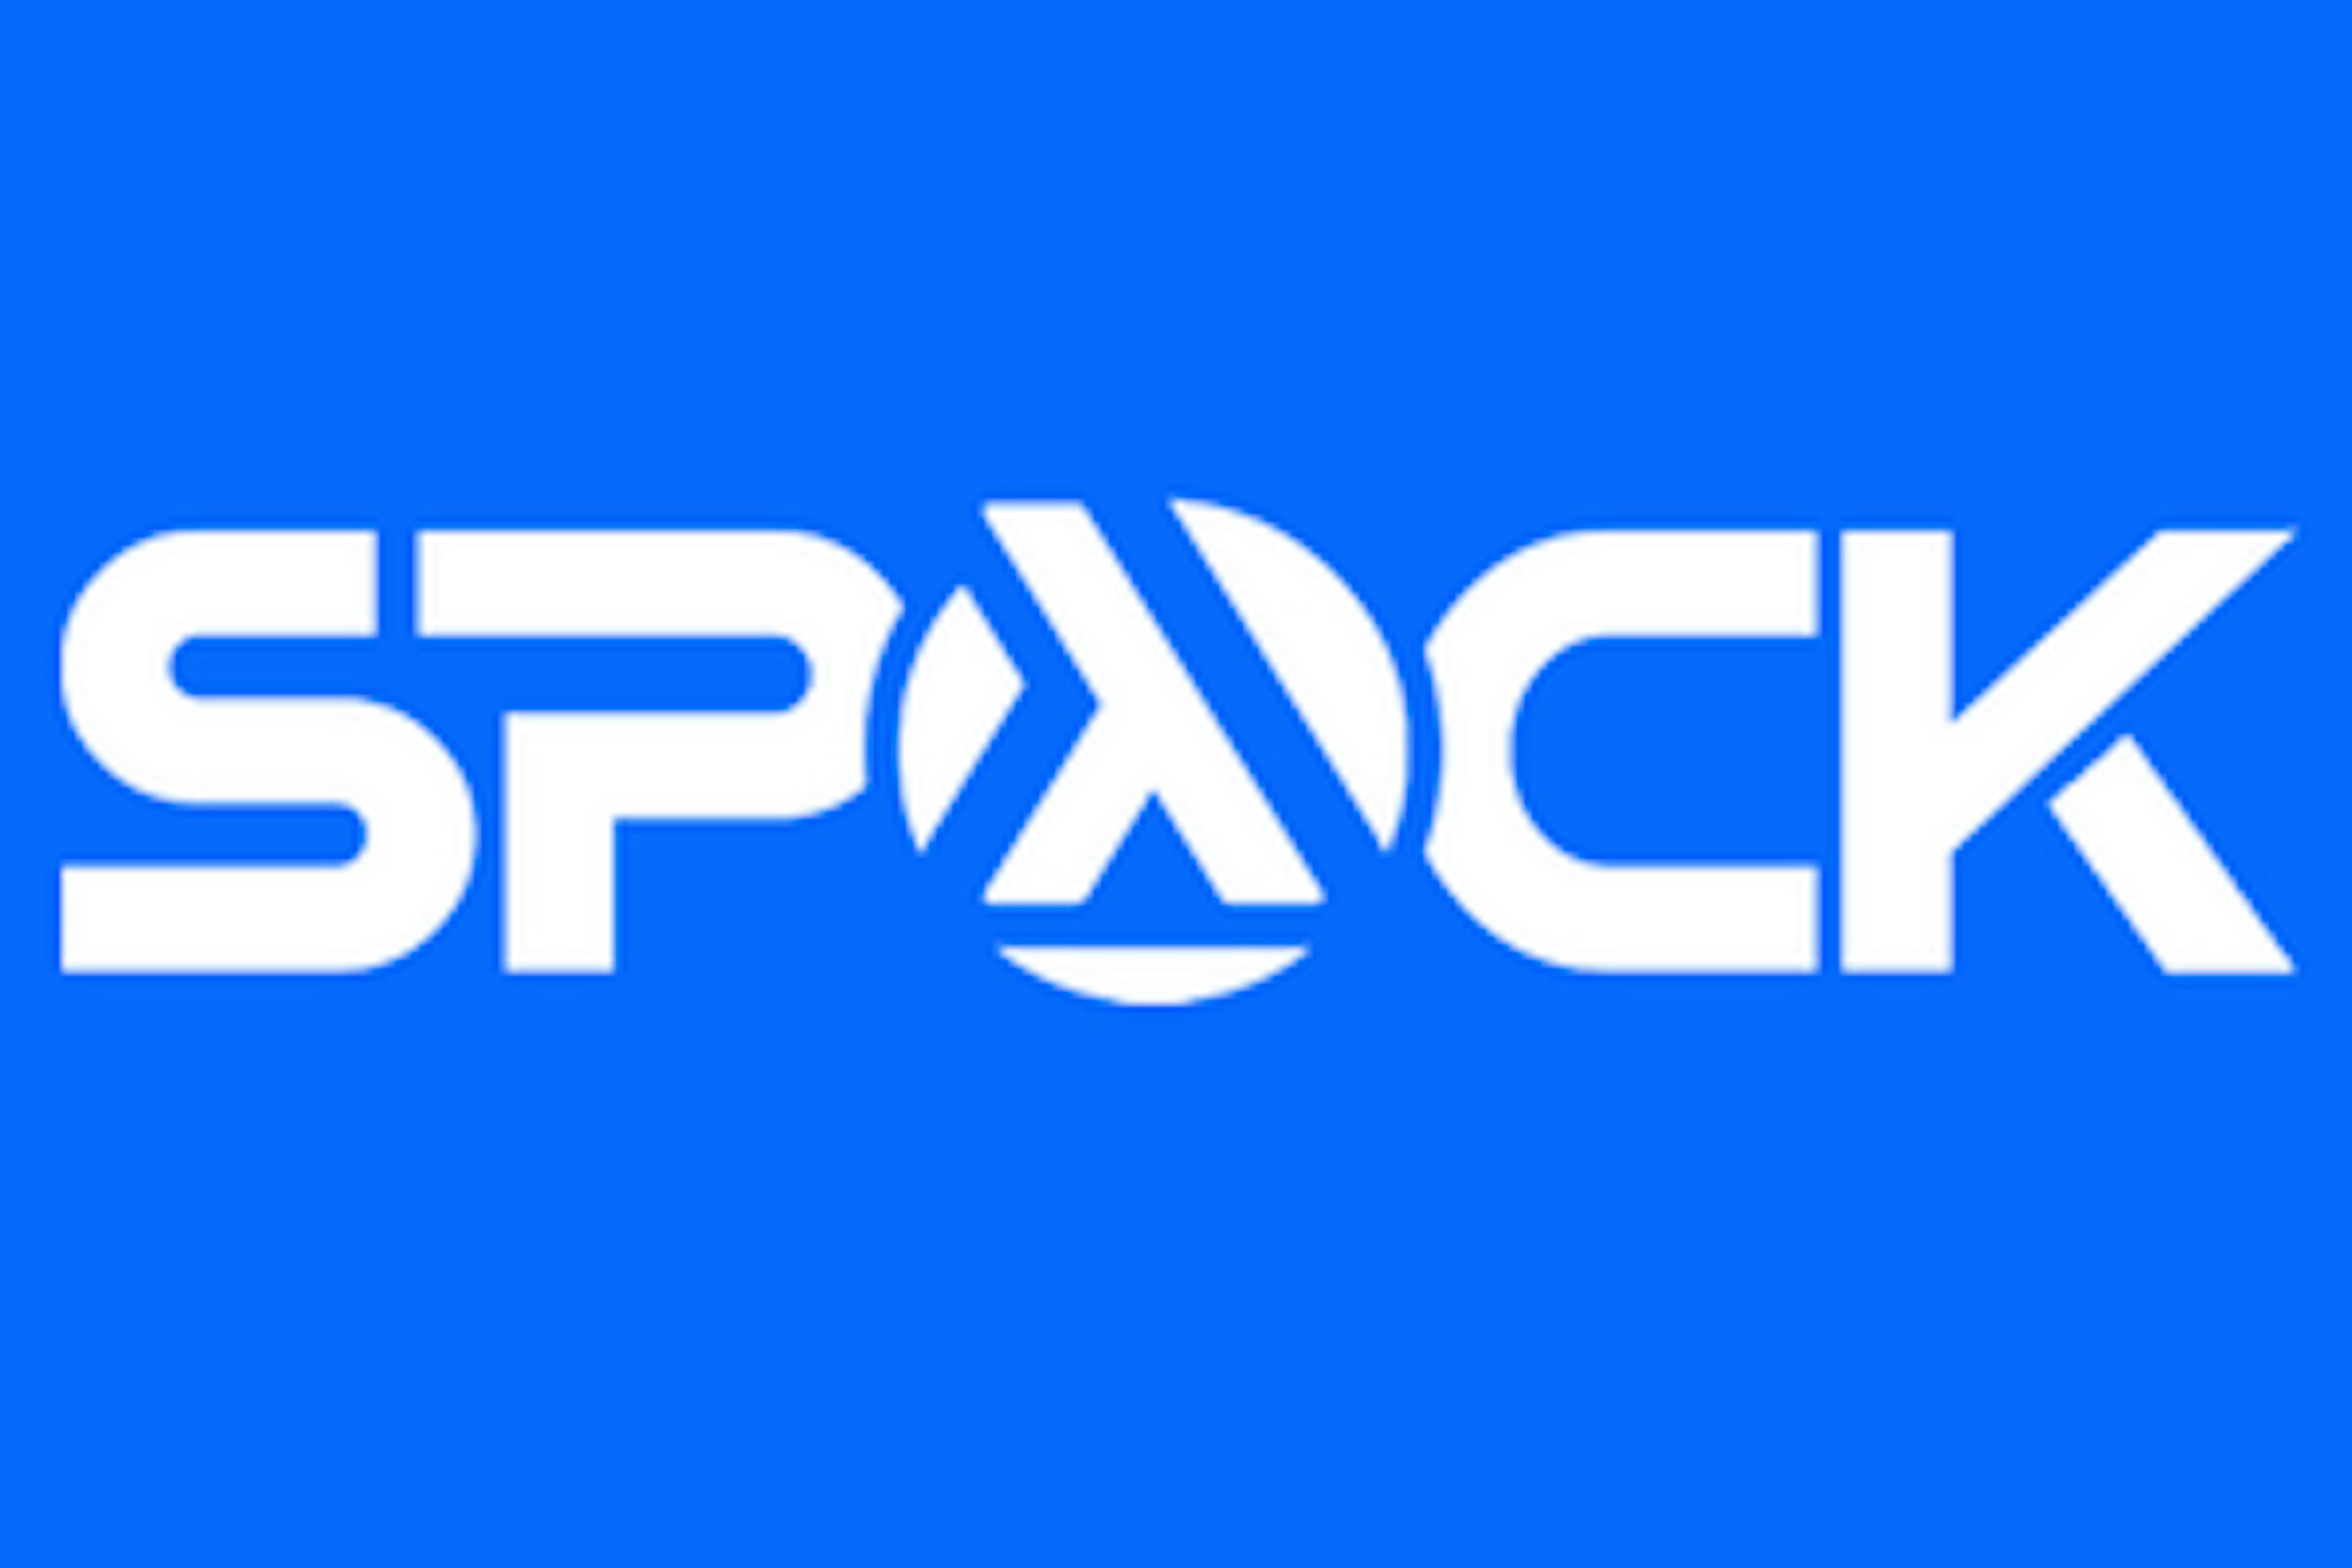 /spock-ii-databases-and-sessions-996c4a4295a4 feature image